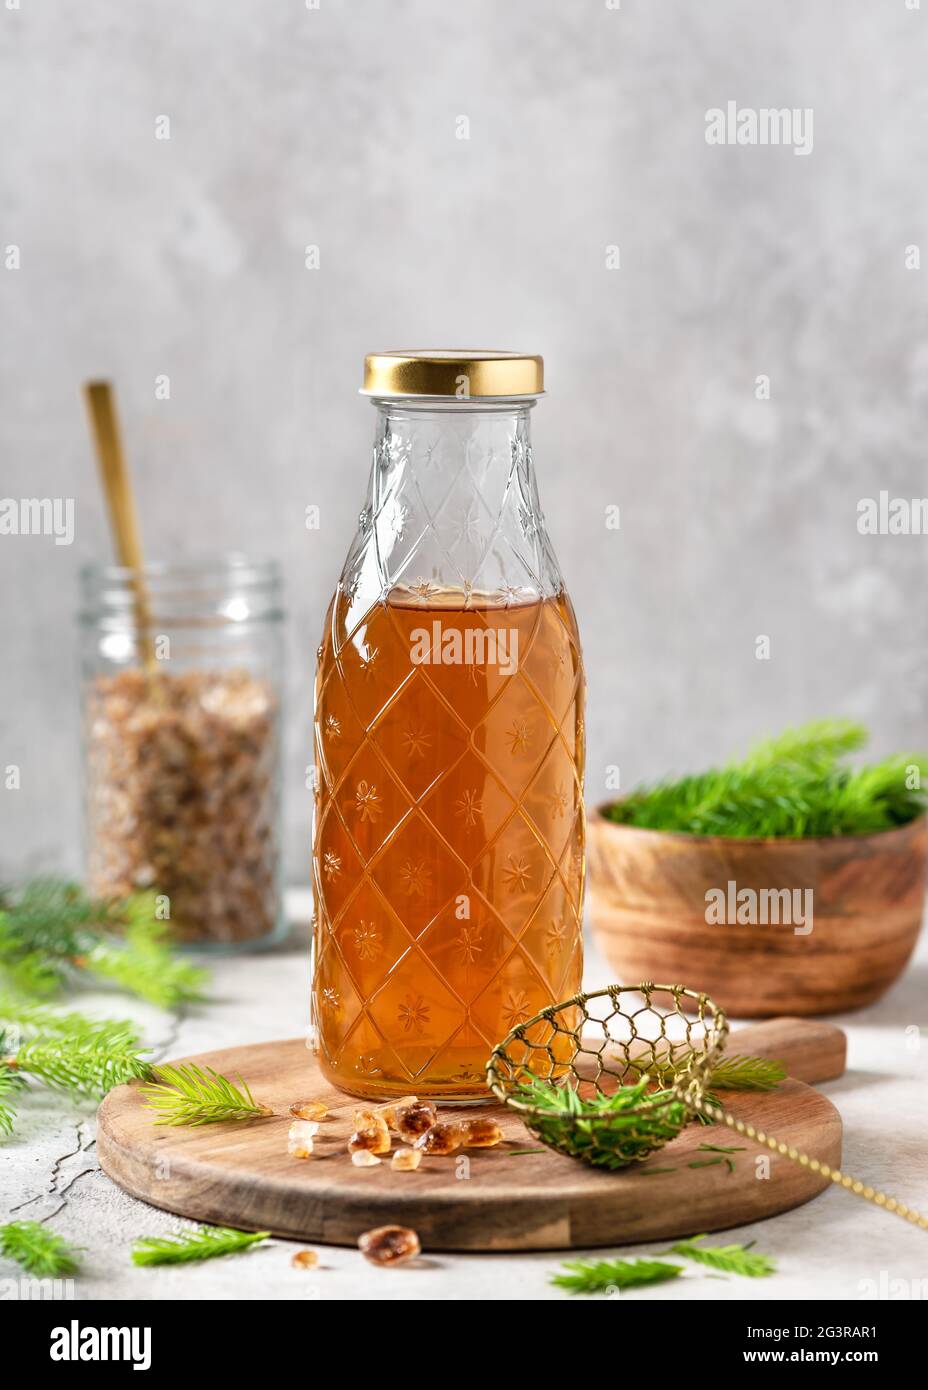 Bottle of homemade syrup made from young spruce tips and nature sugar on the wooden cutting board. Stock Photo